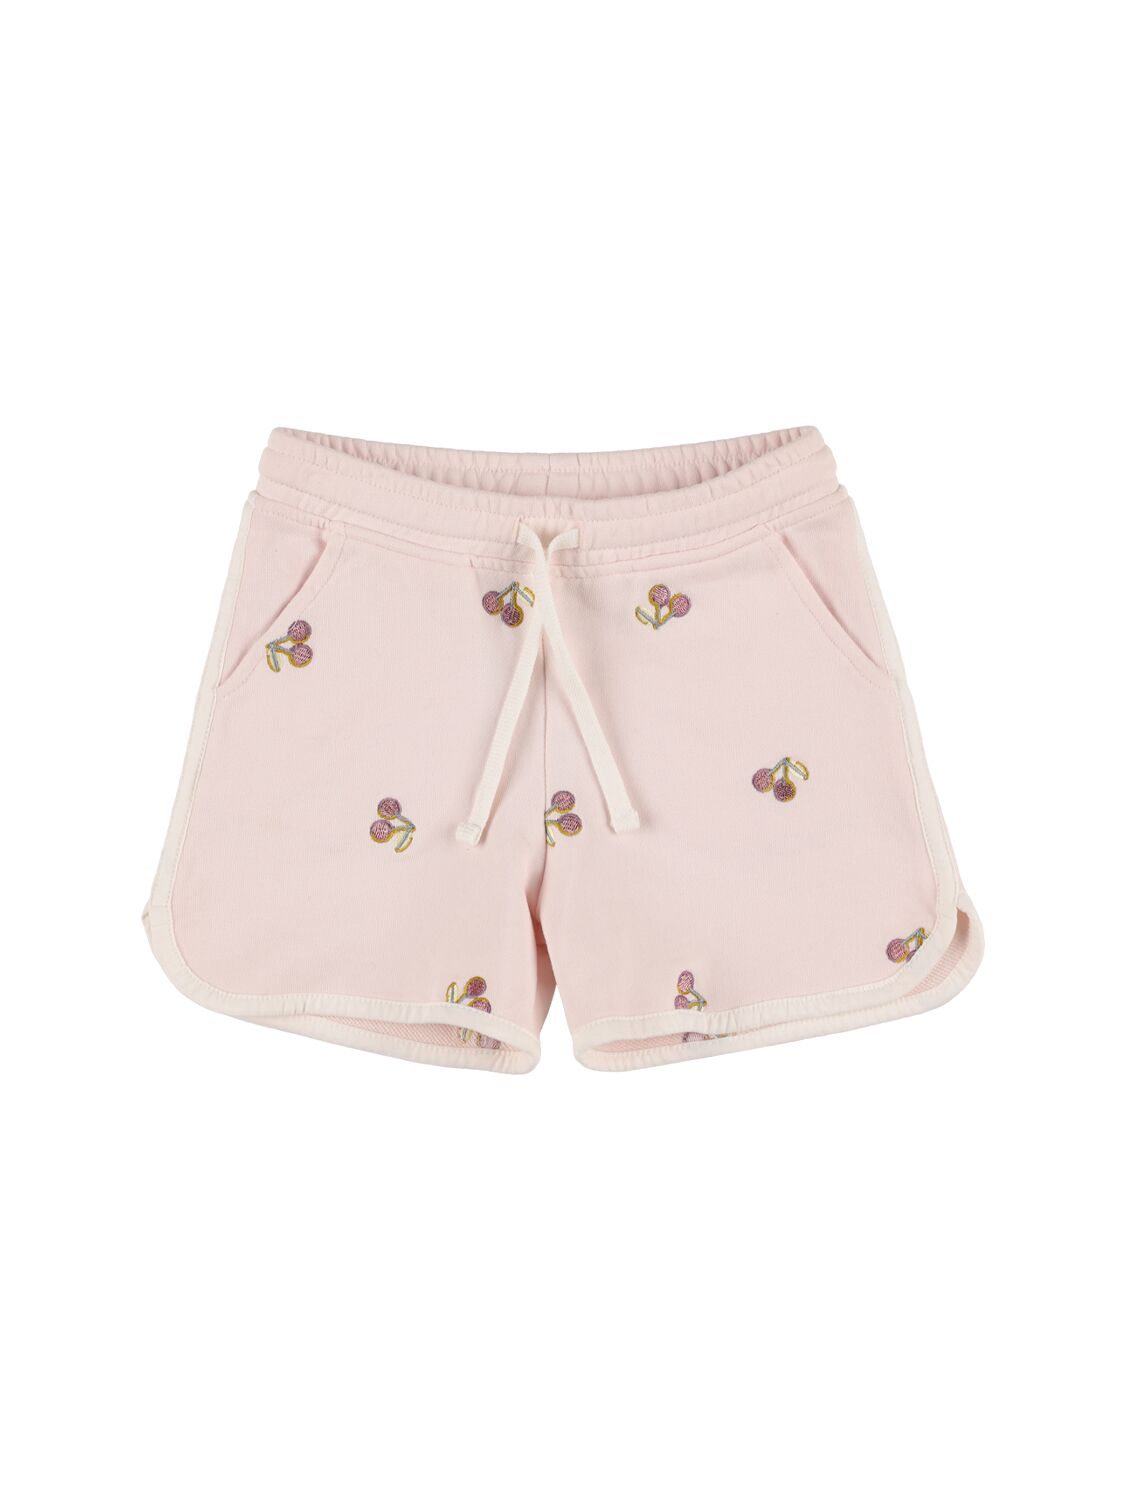 Bonpoint Kids' Cherry Embroidered Cotton Sweat Shorts In Pink